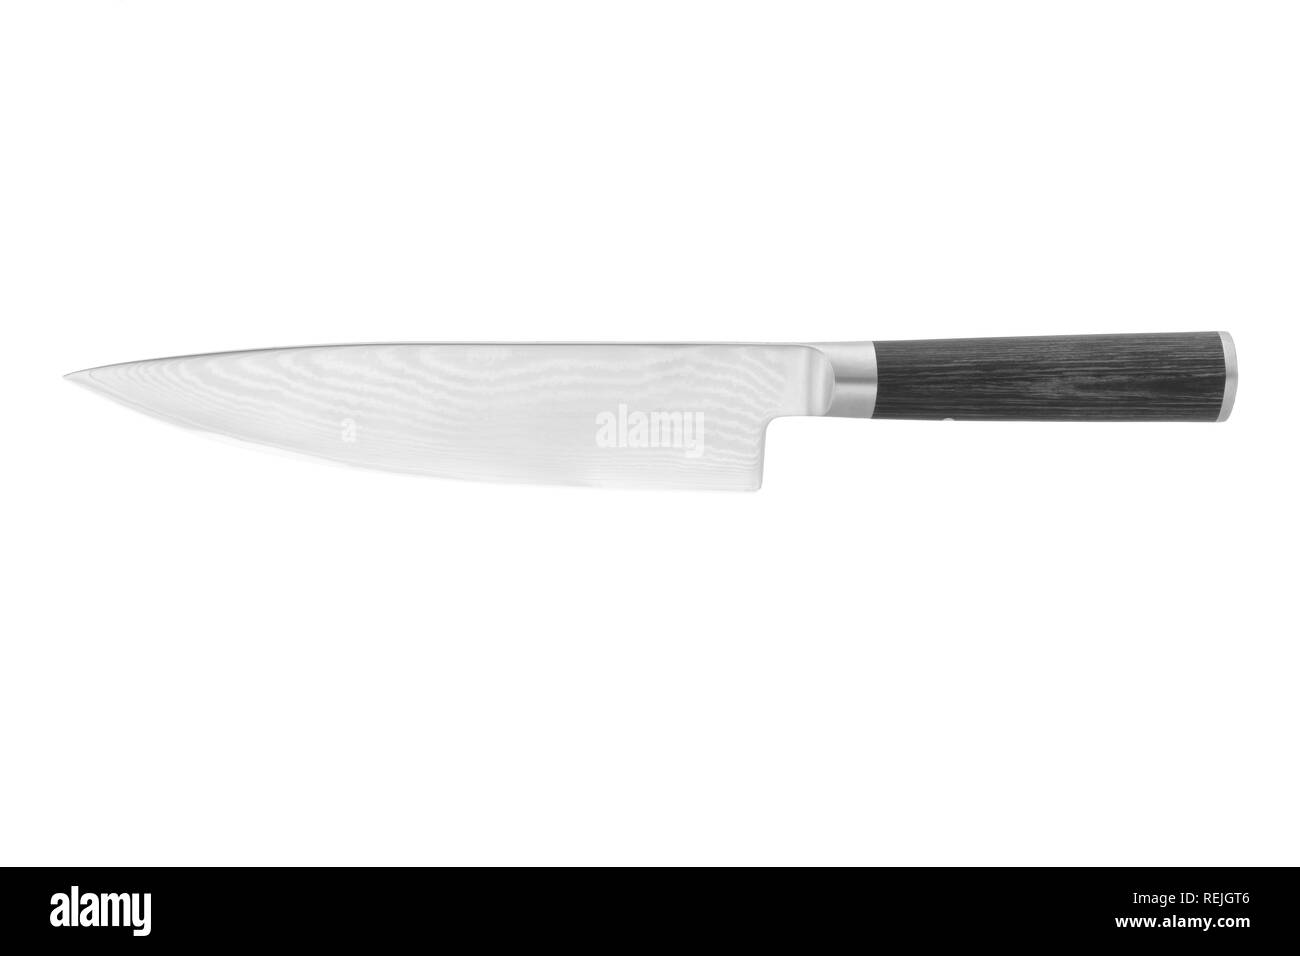 https://c8.alamy.com/comp/REJGT6/a-japanese-chef-knife-on-white-background-with-clipping-path-REJGT6.jpg